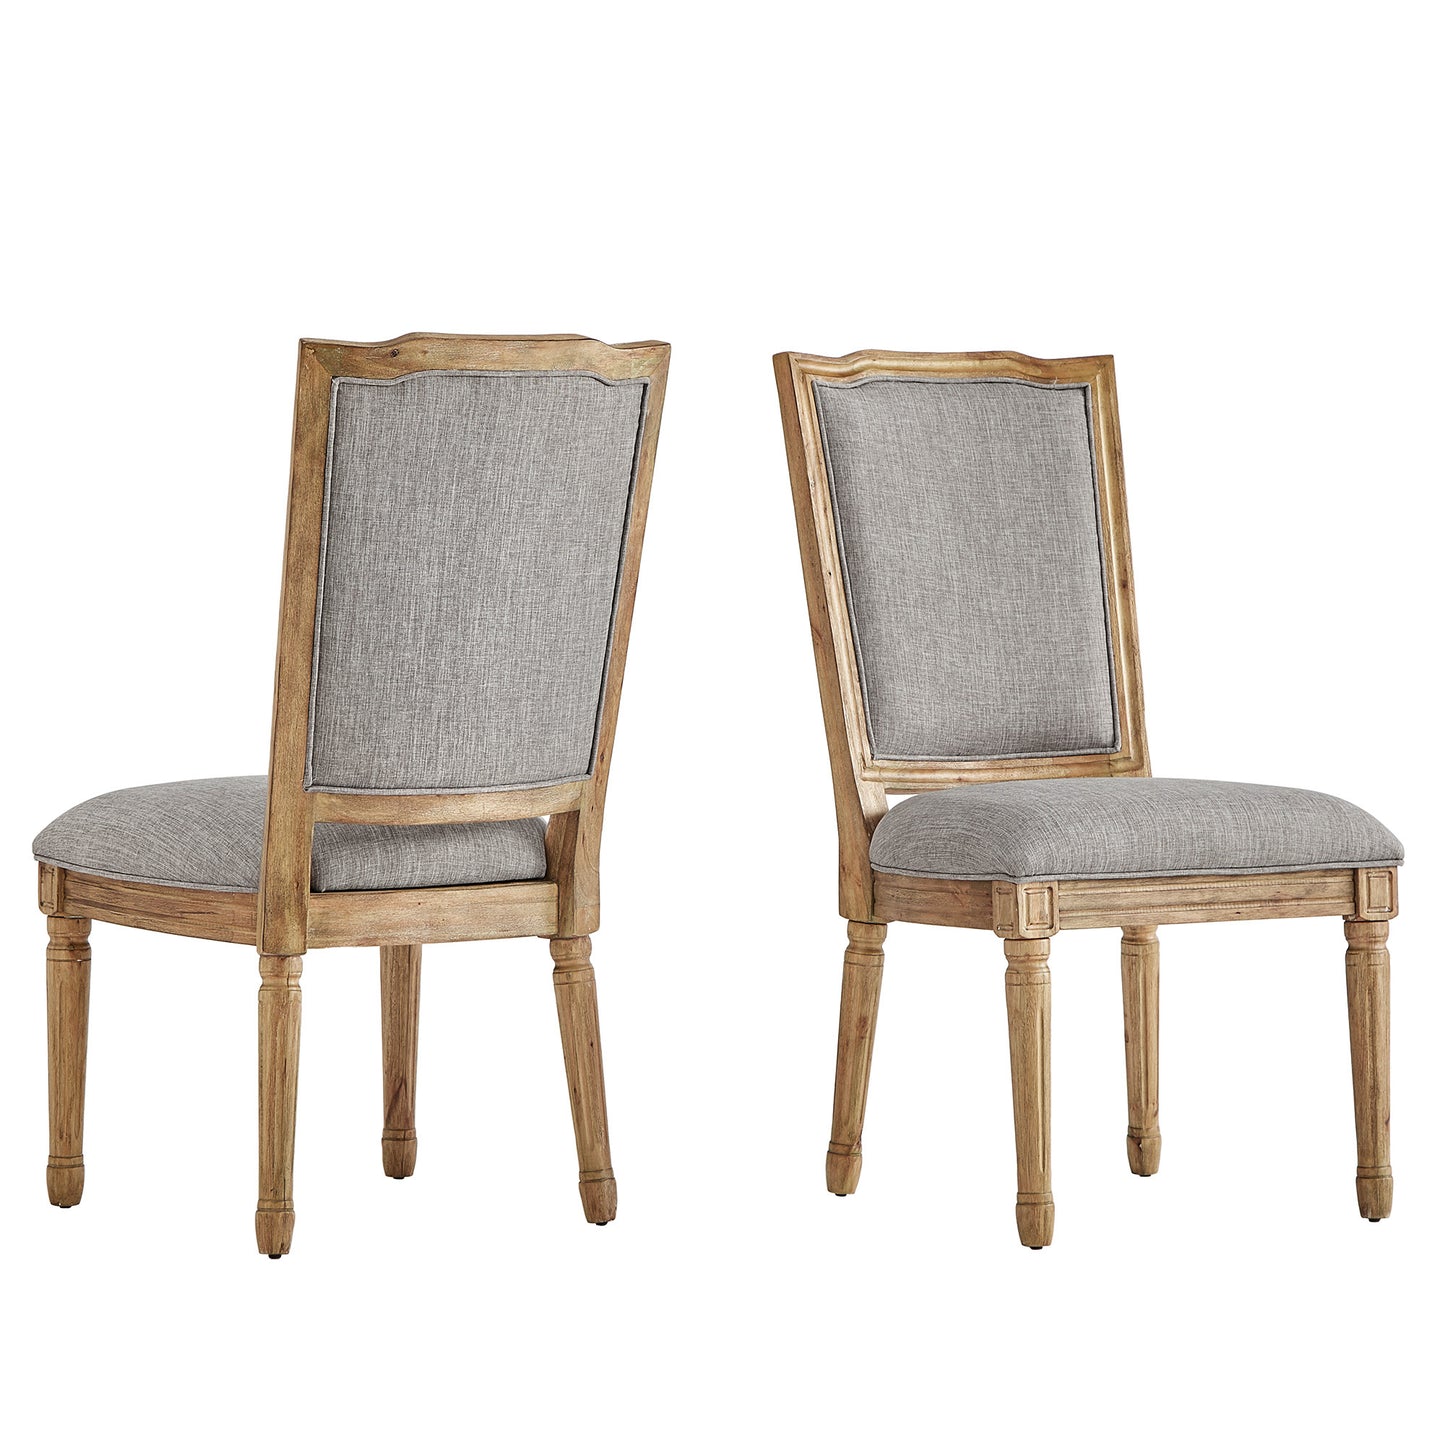 Ornate Linen and Wood Dining Chairs (Set of 2) - Gray Linen, Natural Finish